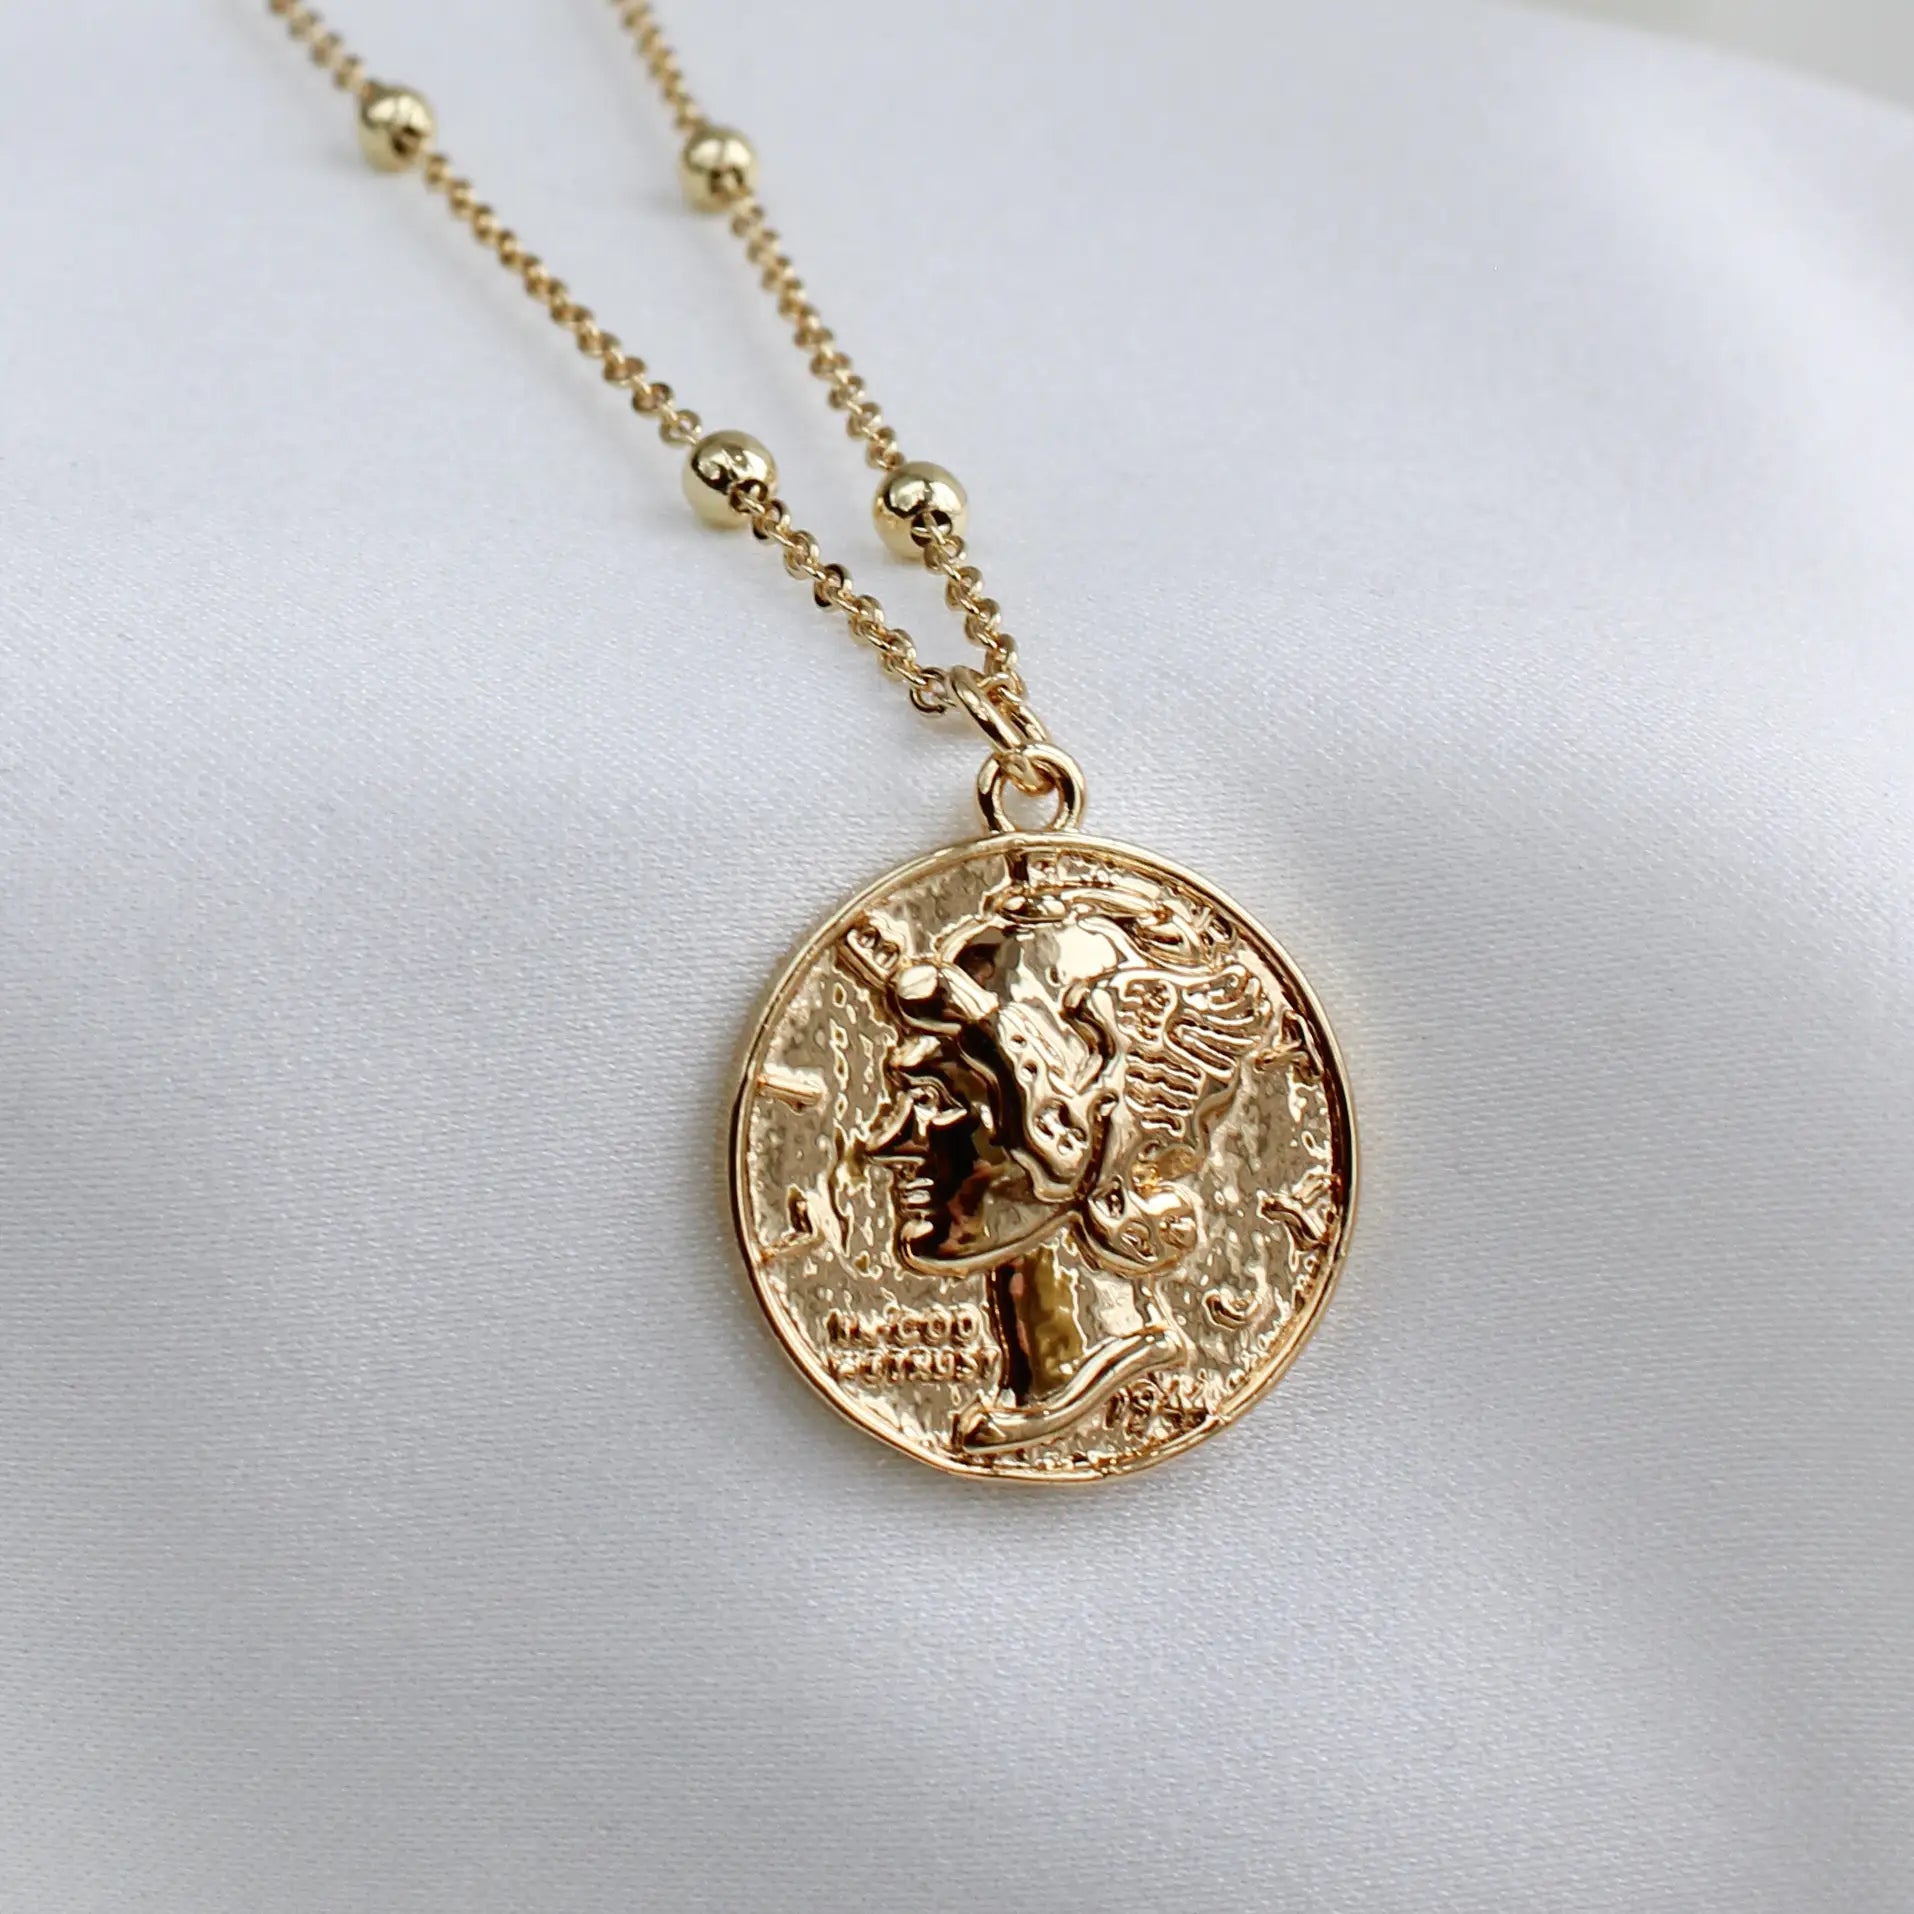 The Hermes Medallion Necklace by MASHALLAH